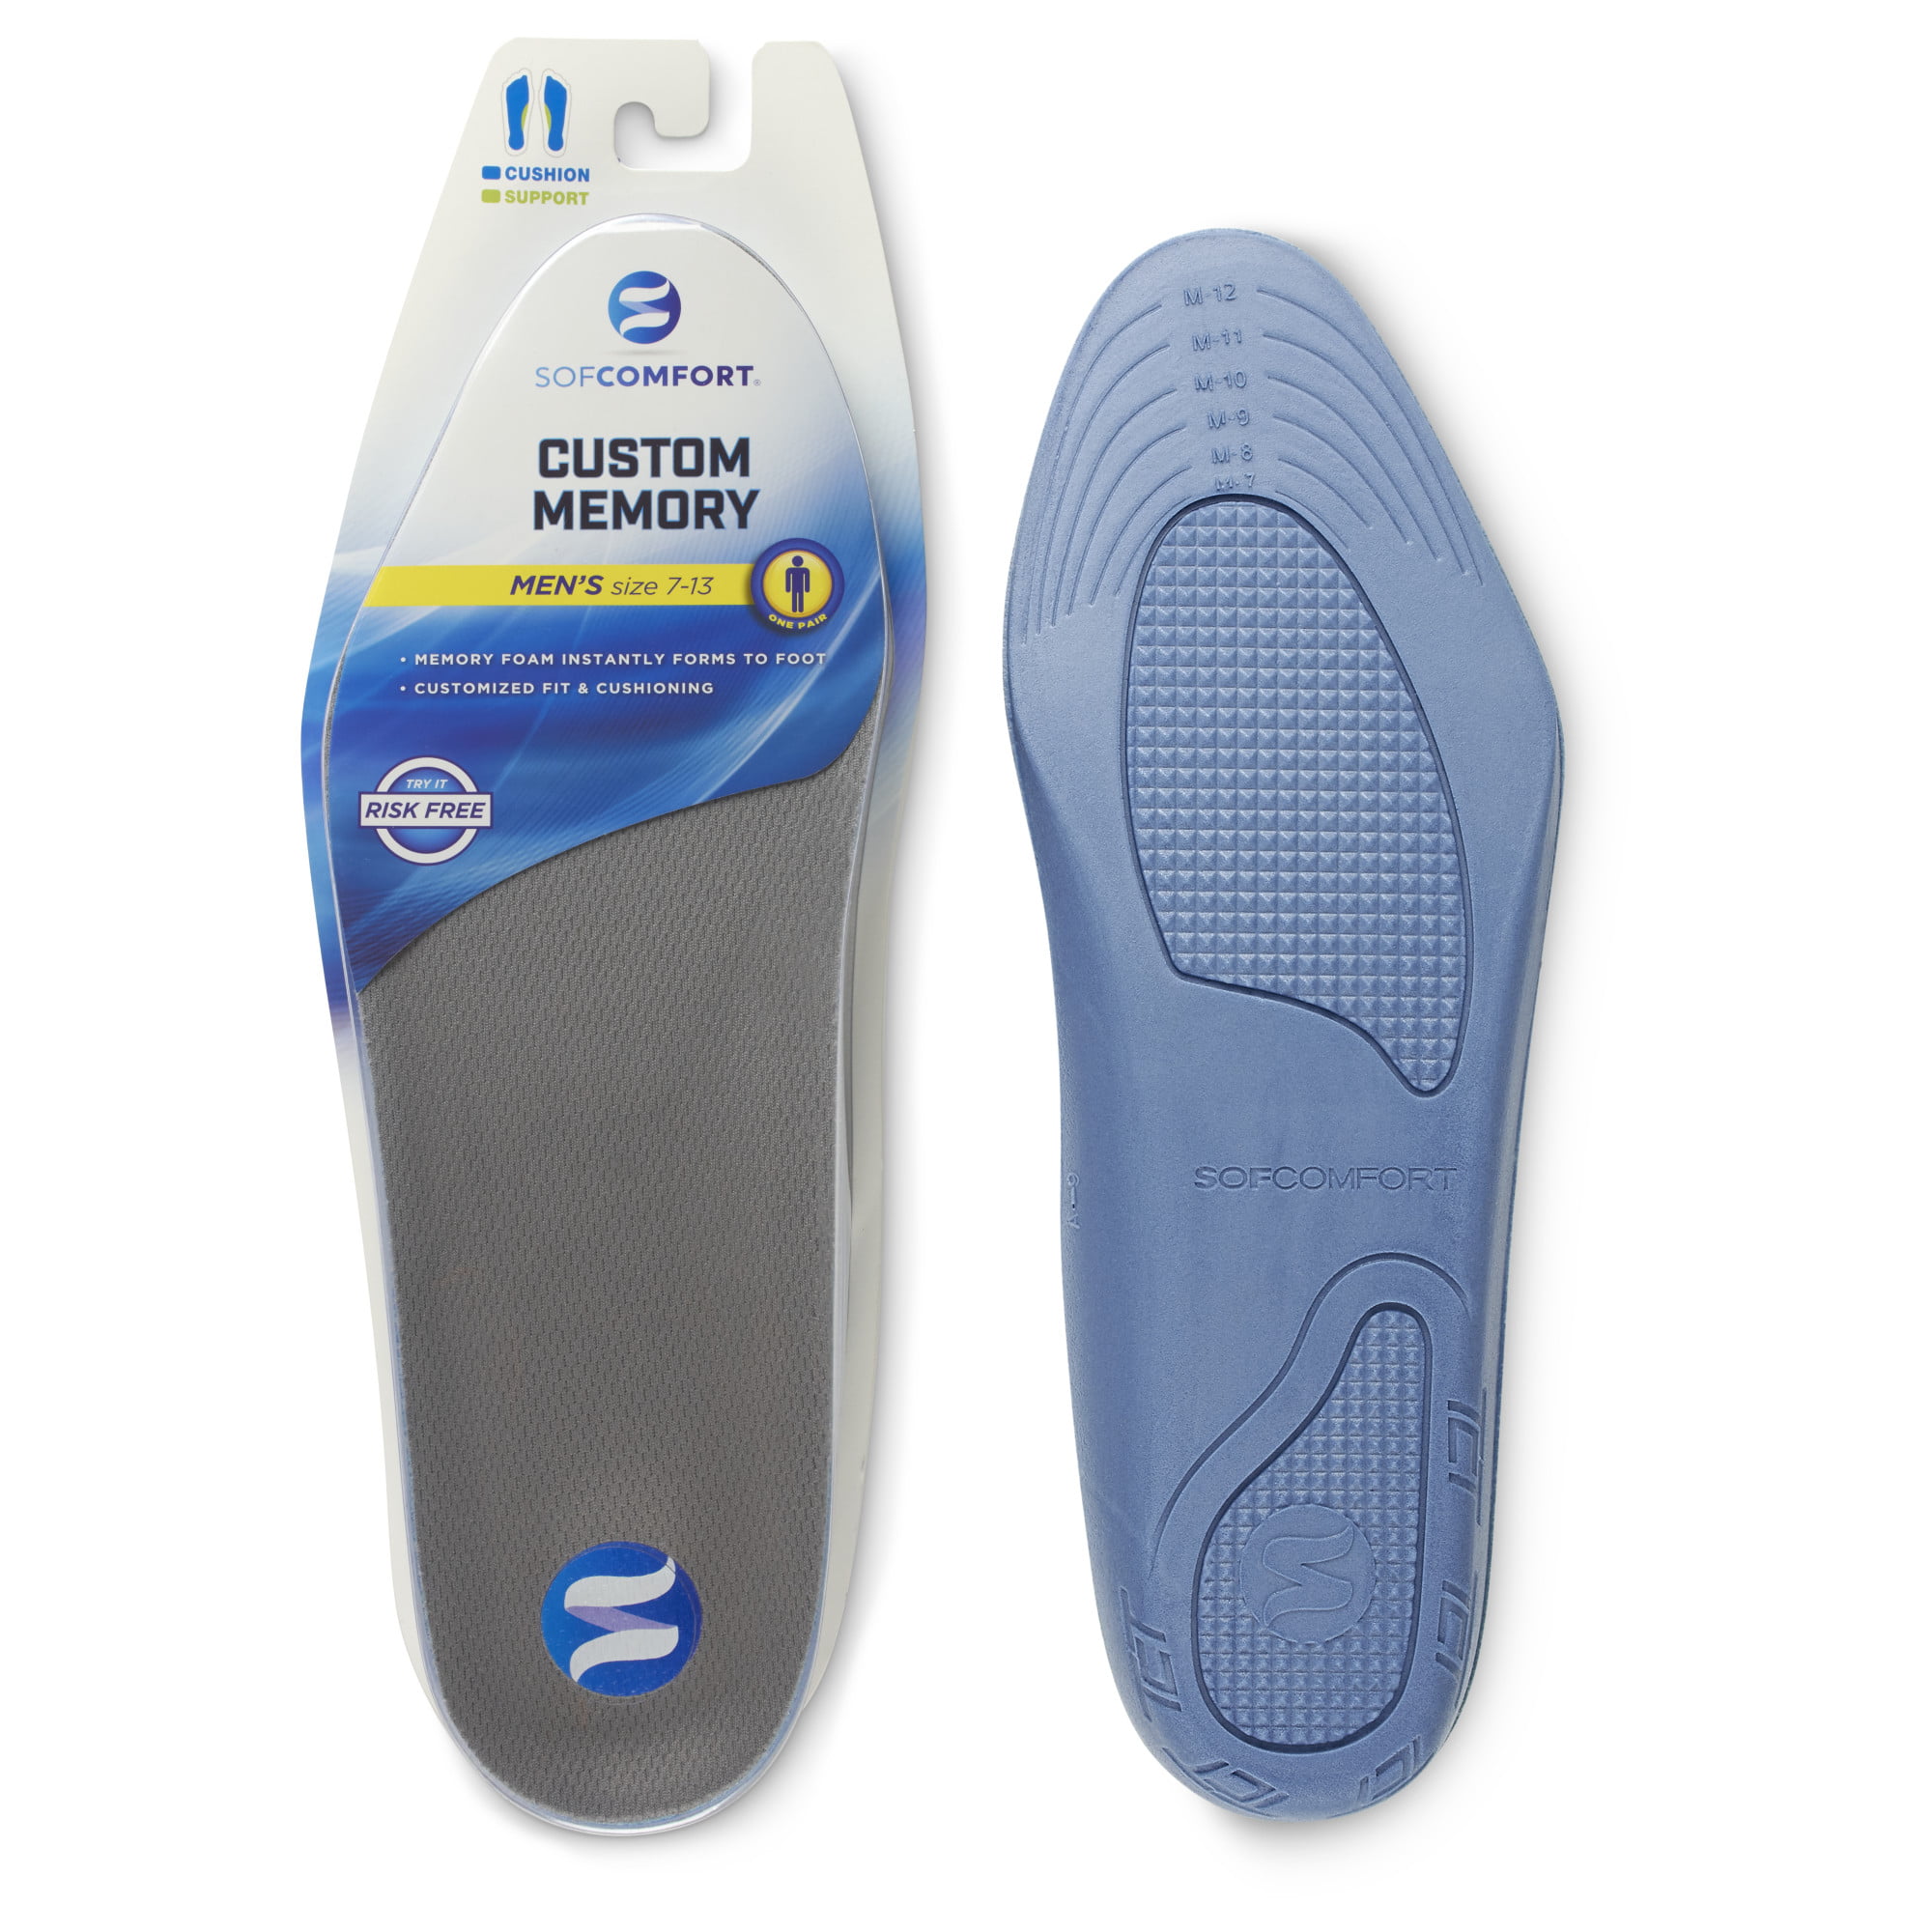 Your Health Starts With In The Feet Cushion Comfort Insoles Much like original 